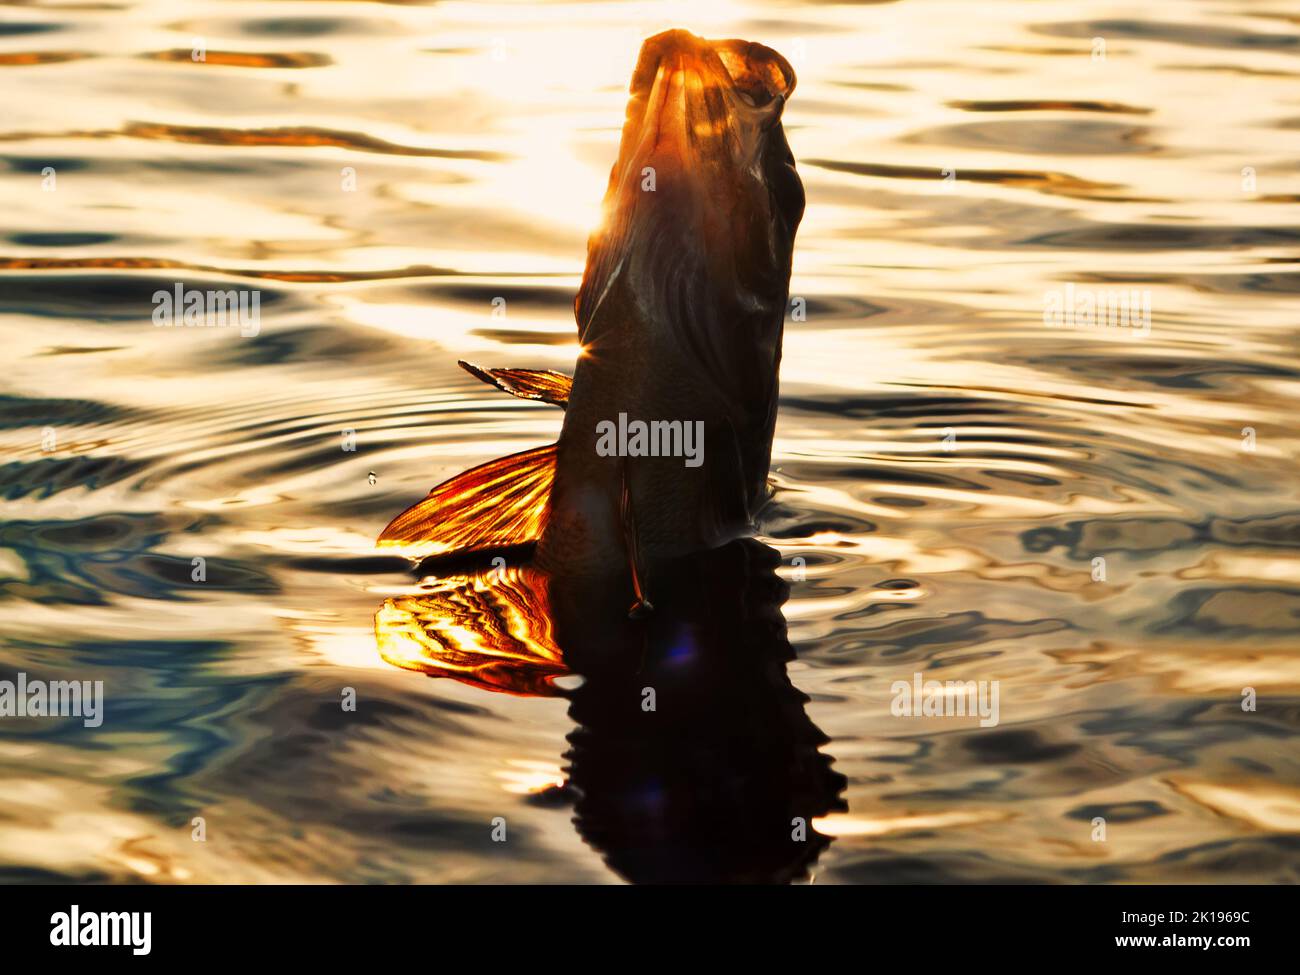 Fishing at sunset. Catching predatory fish on spinning. Sunset colors on the water surface, sunny path from the low sun. Perch caught on yellow spoonb Stock Photo